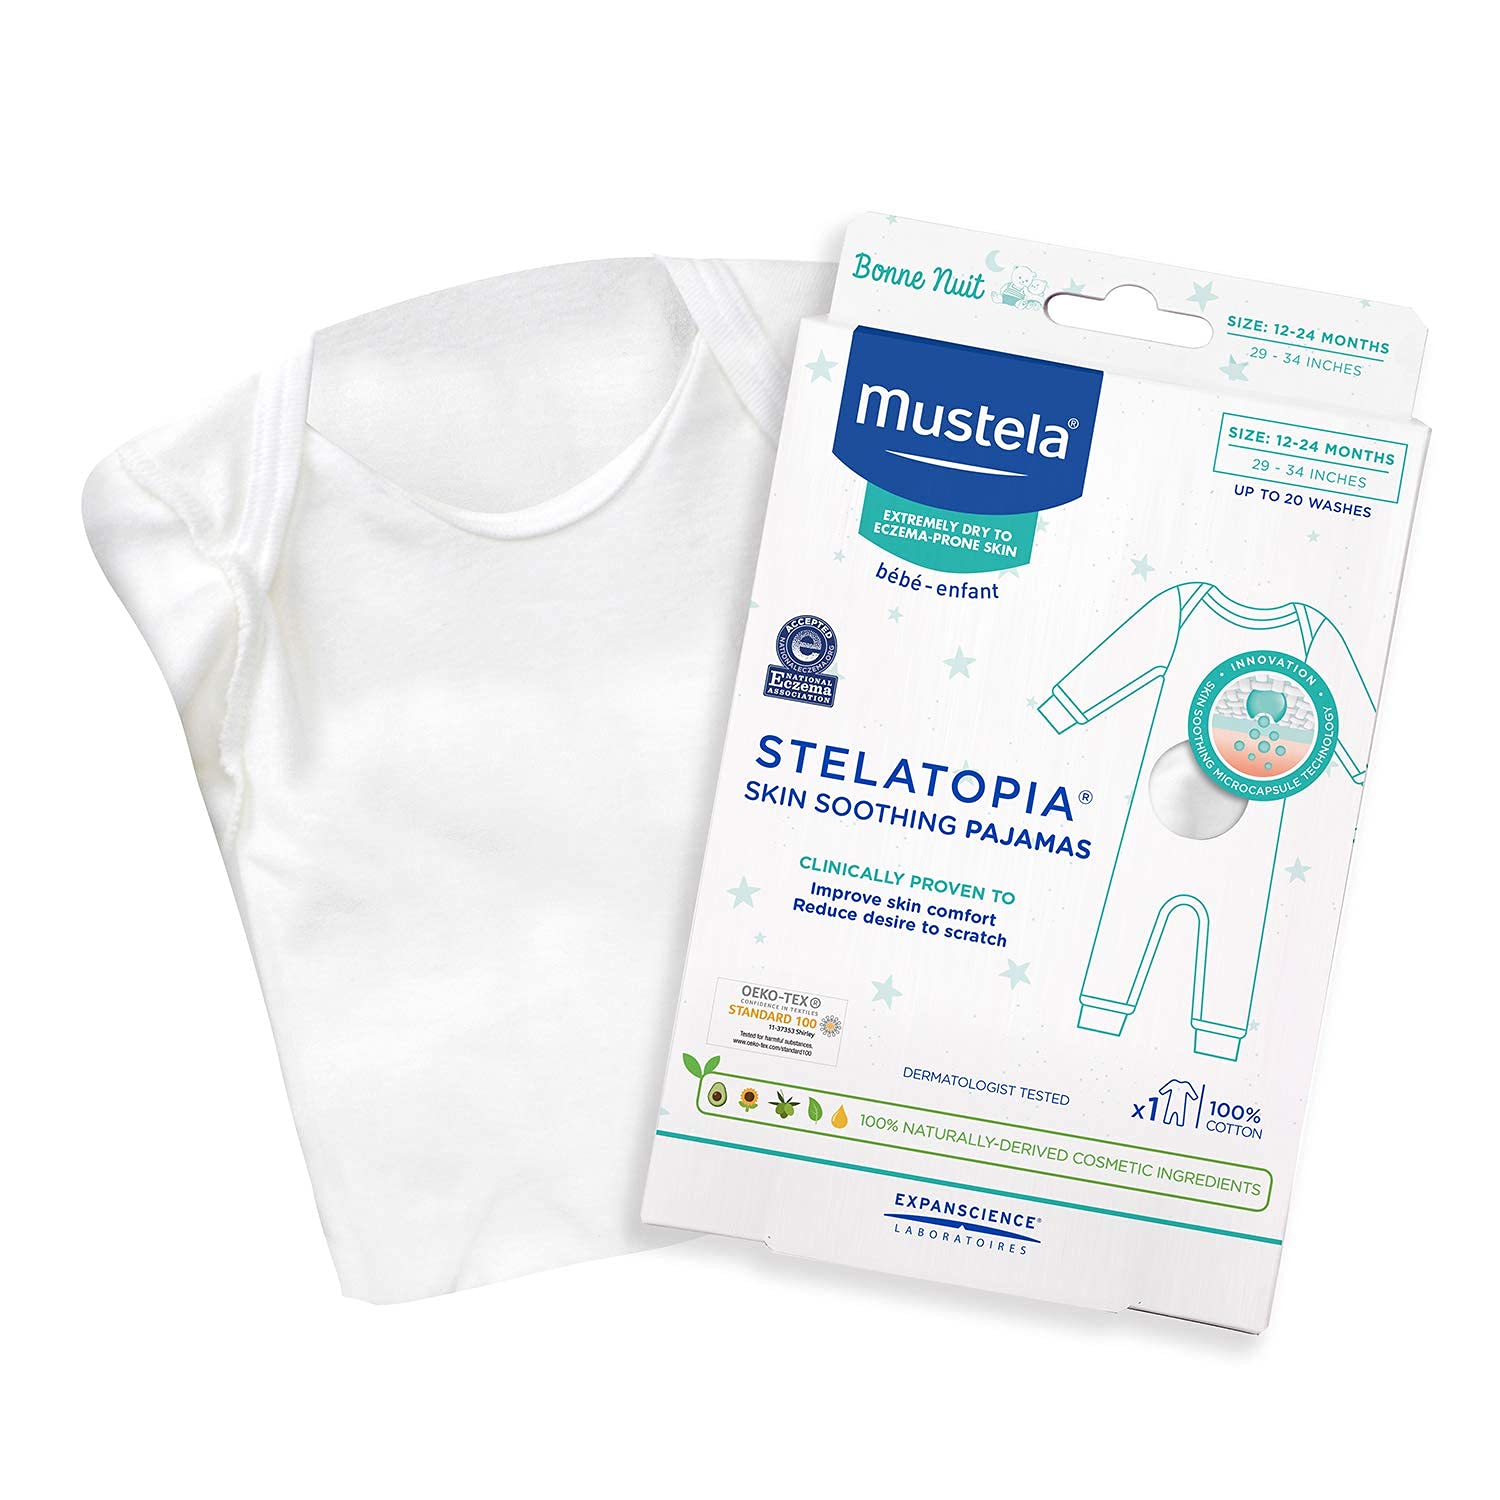 Mustela Stelatopia Skin Soothing Pajamas - Baby Pajamas for Eczema-Prone Skin - with Natural Avocado & Sunflower Oil - 12 to 24 Months,1 Count (Pack of 1)